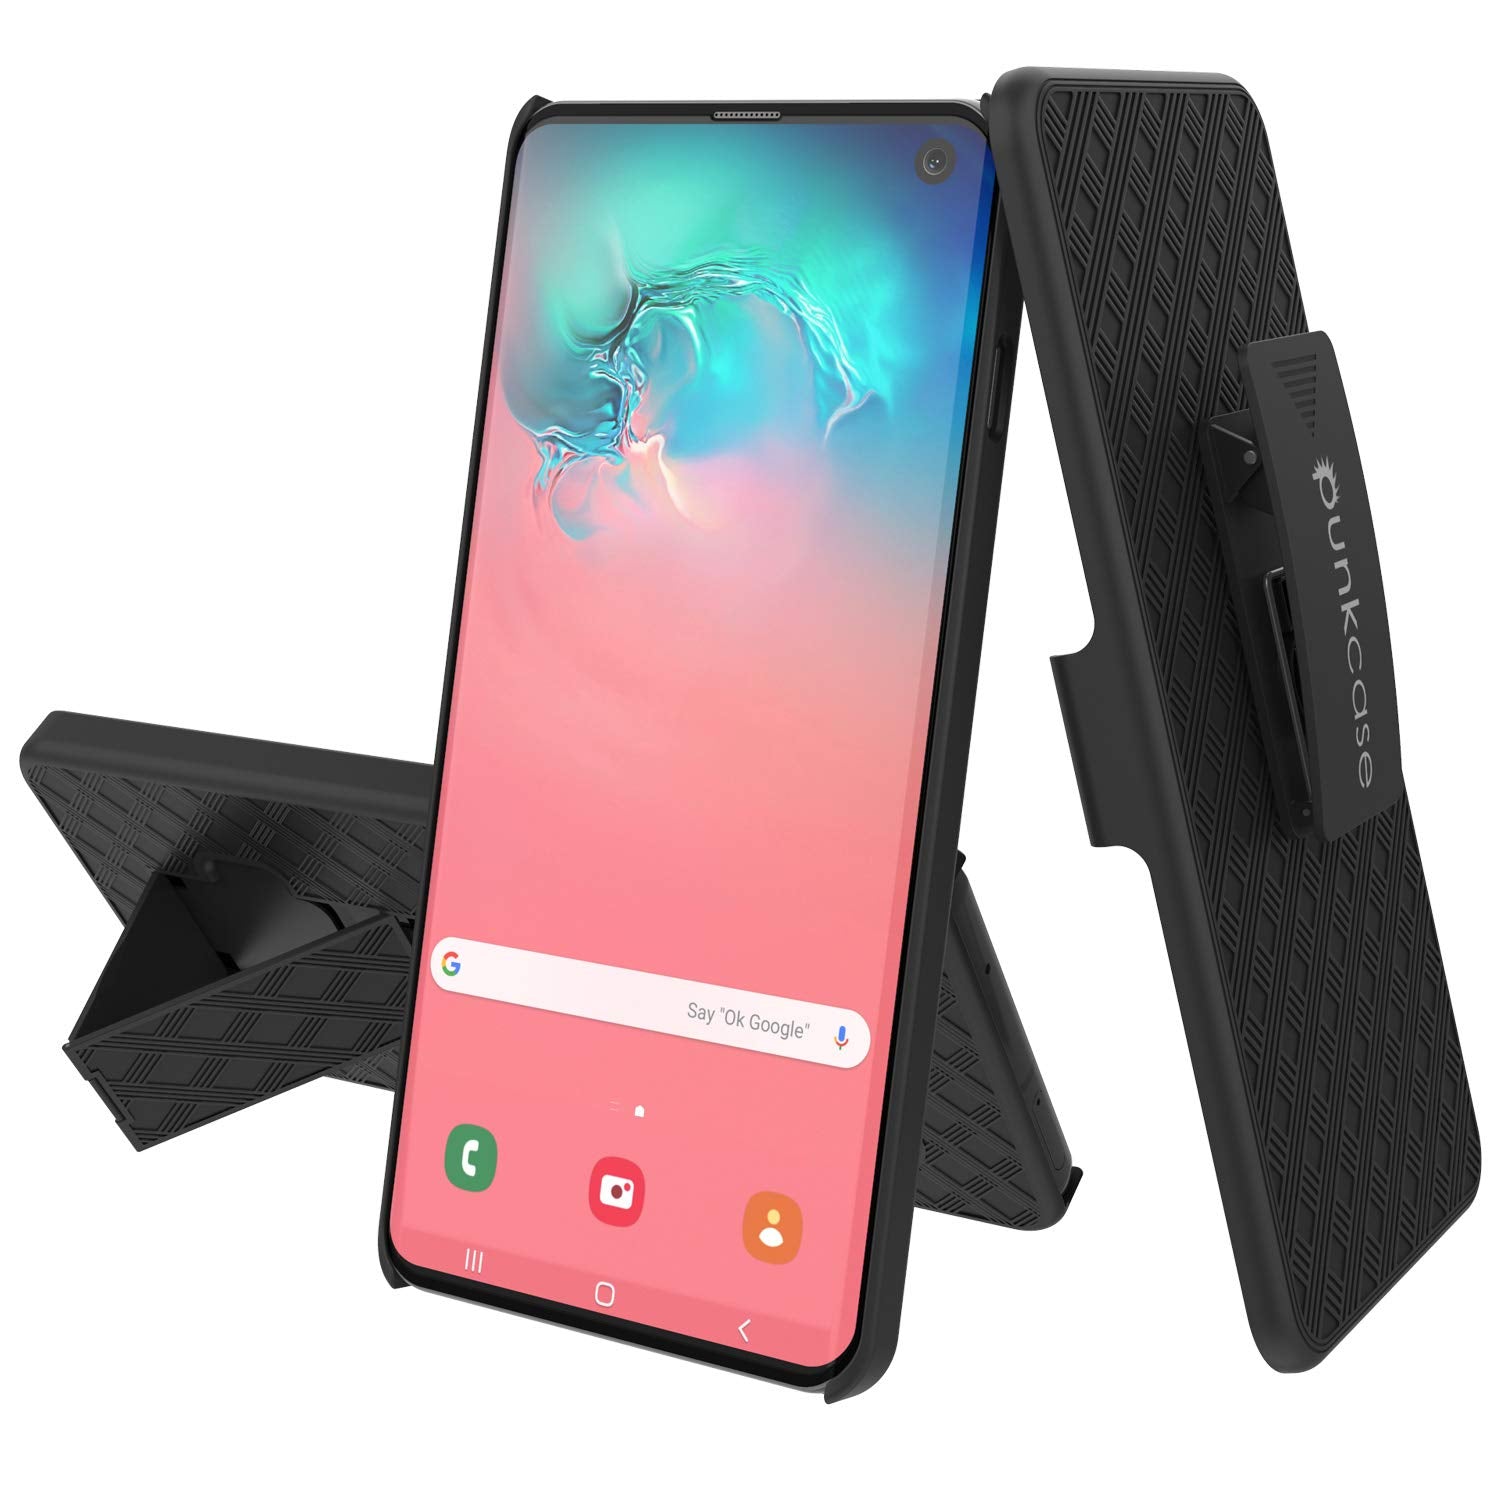 Punkcase Galaxy S10e Case With Screen Protector, Holster Belt Clip [Black]